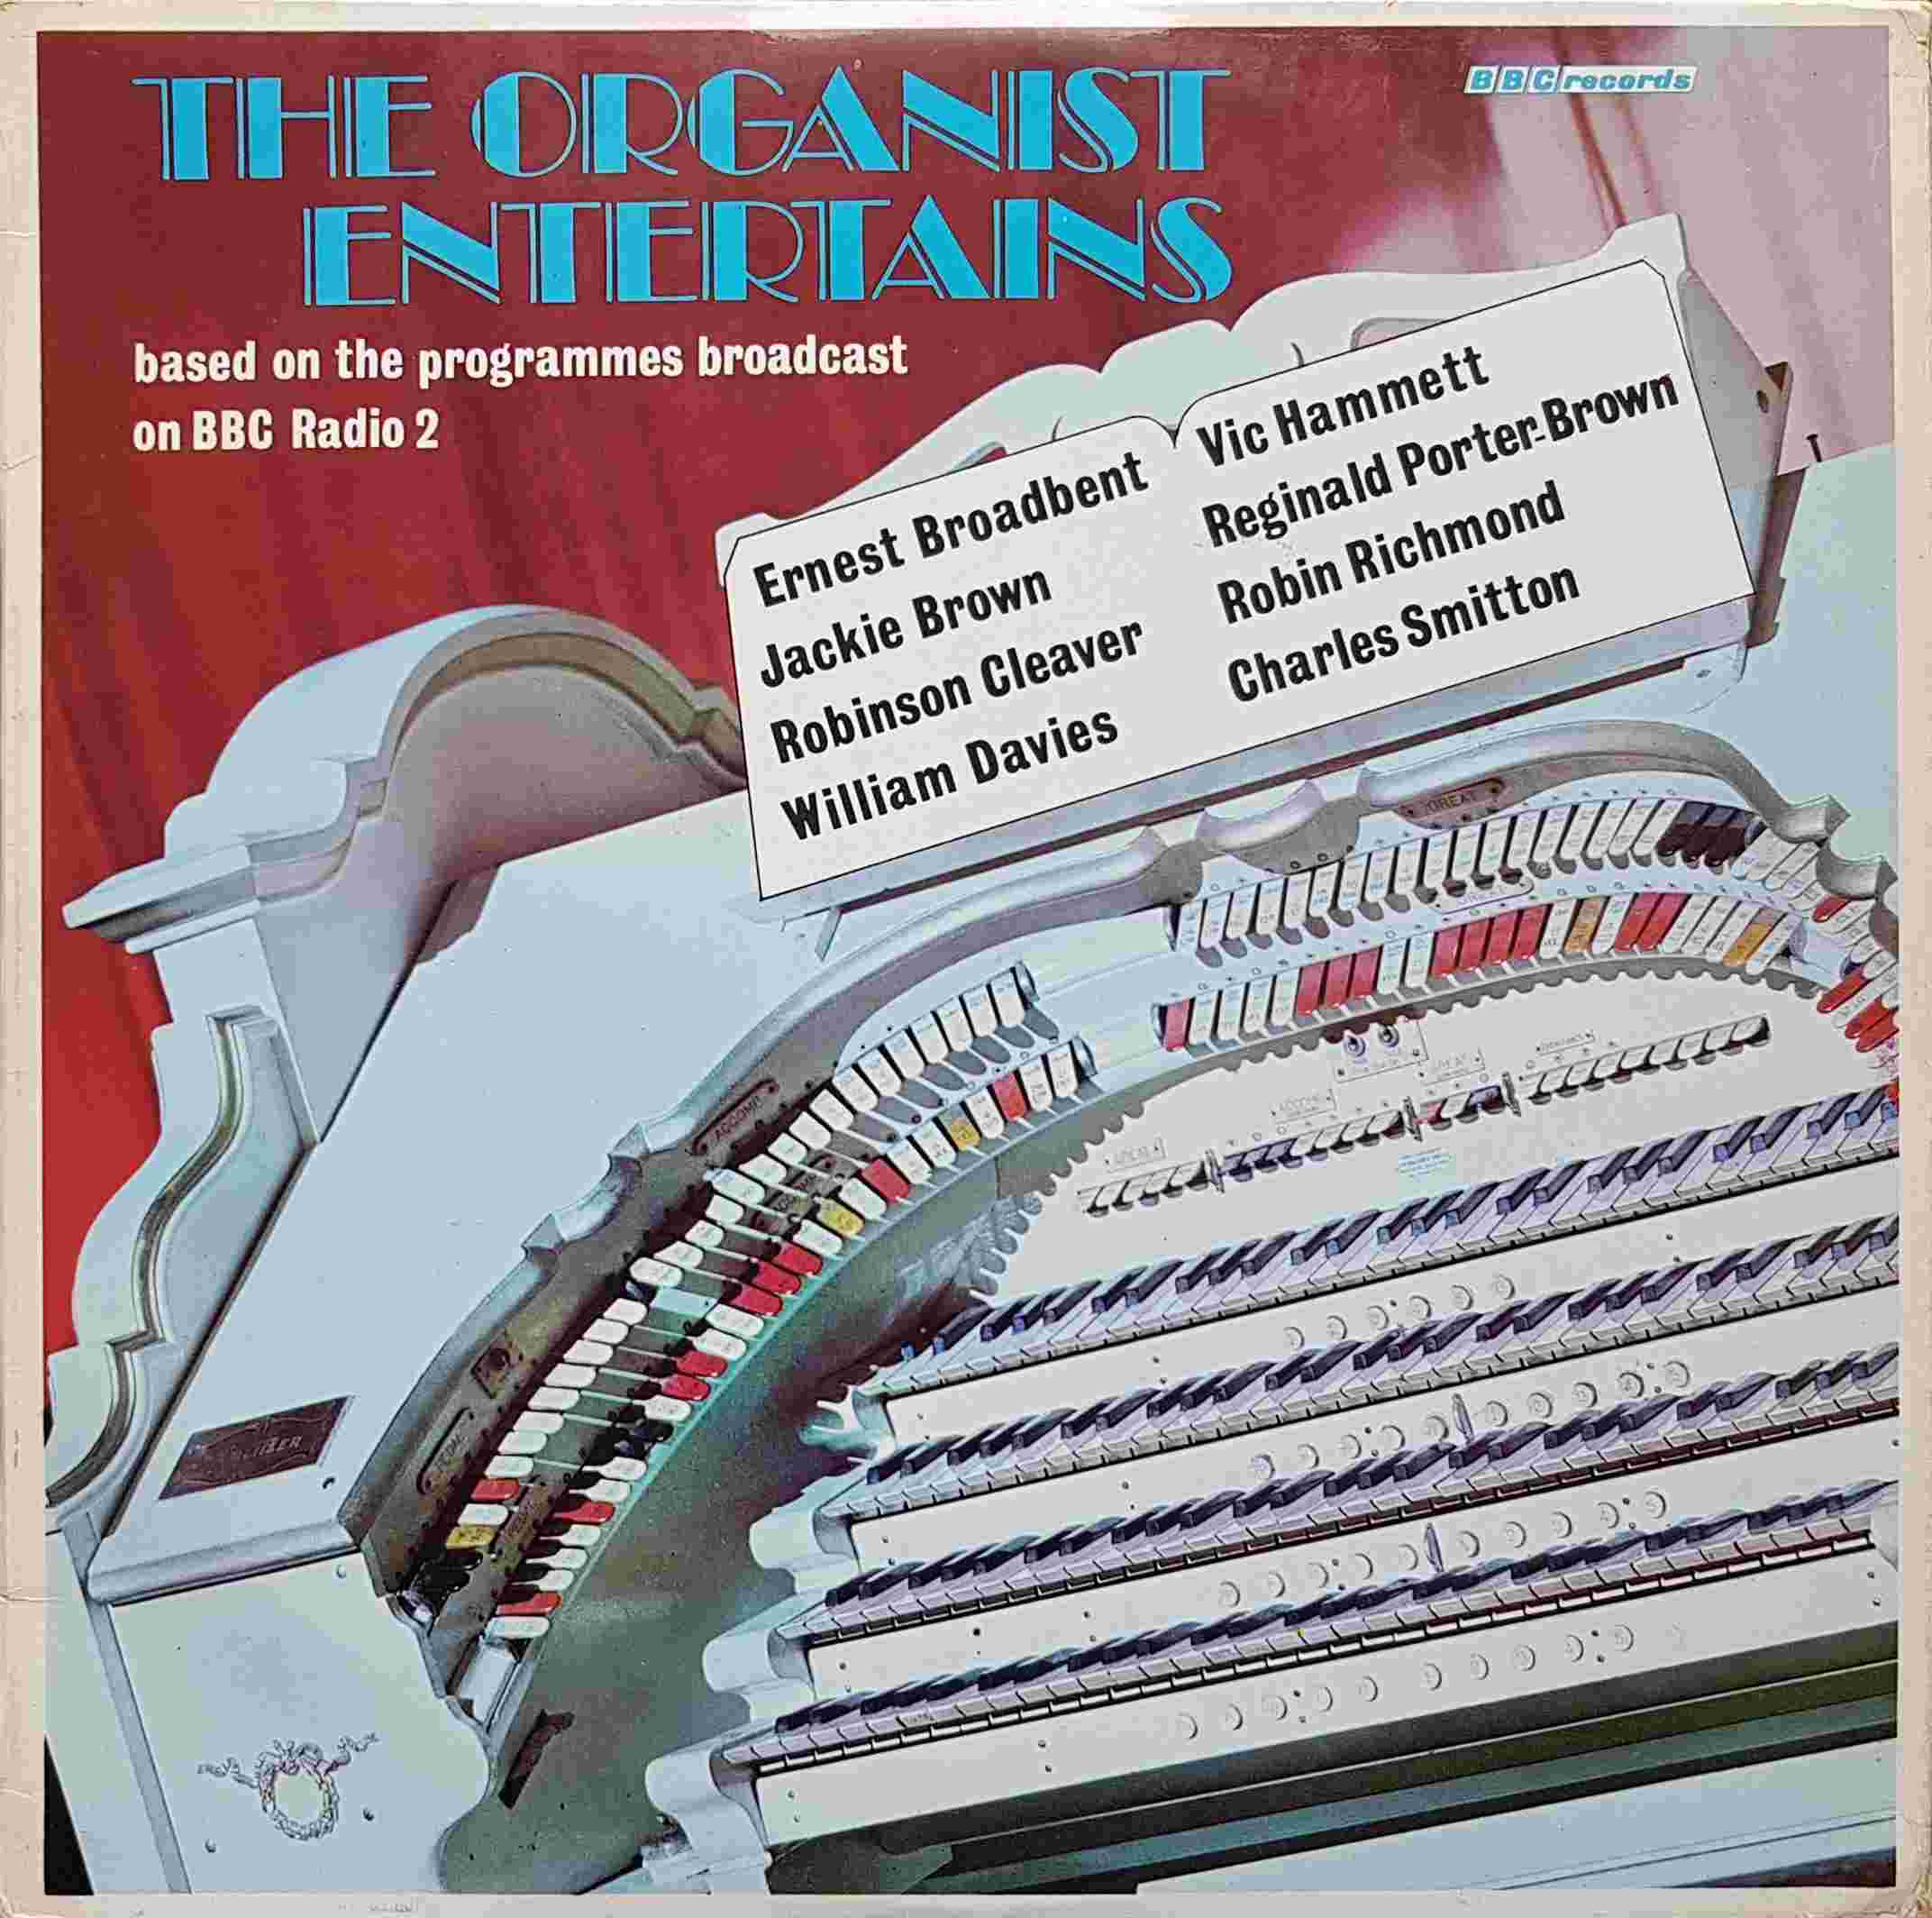 Picture of REC 72 The organist entertains by artist Various from the BBC albums - Records and Tapes library